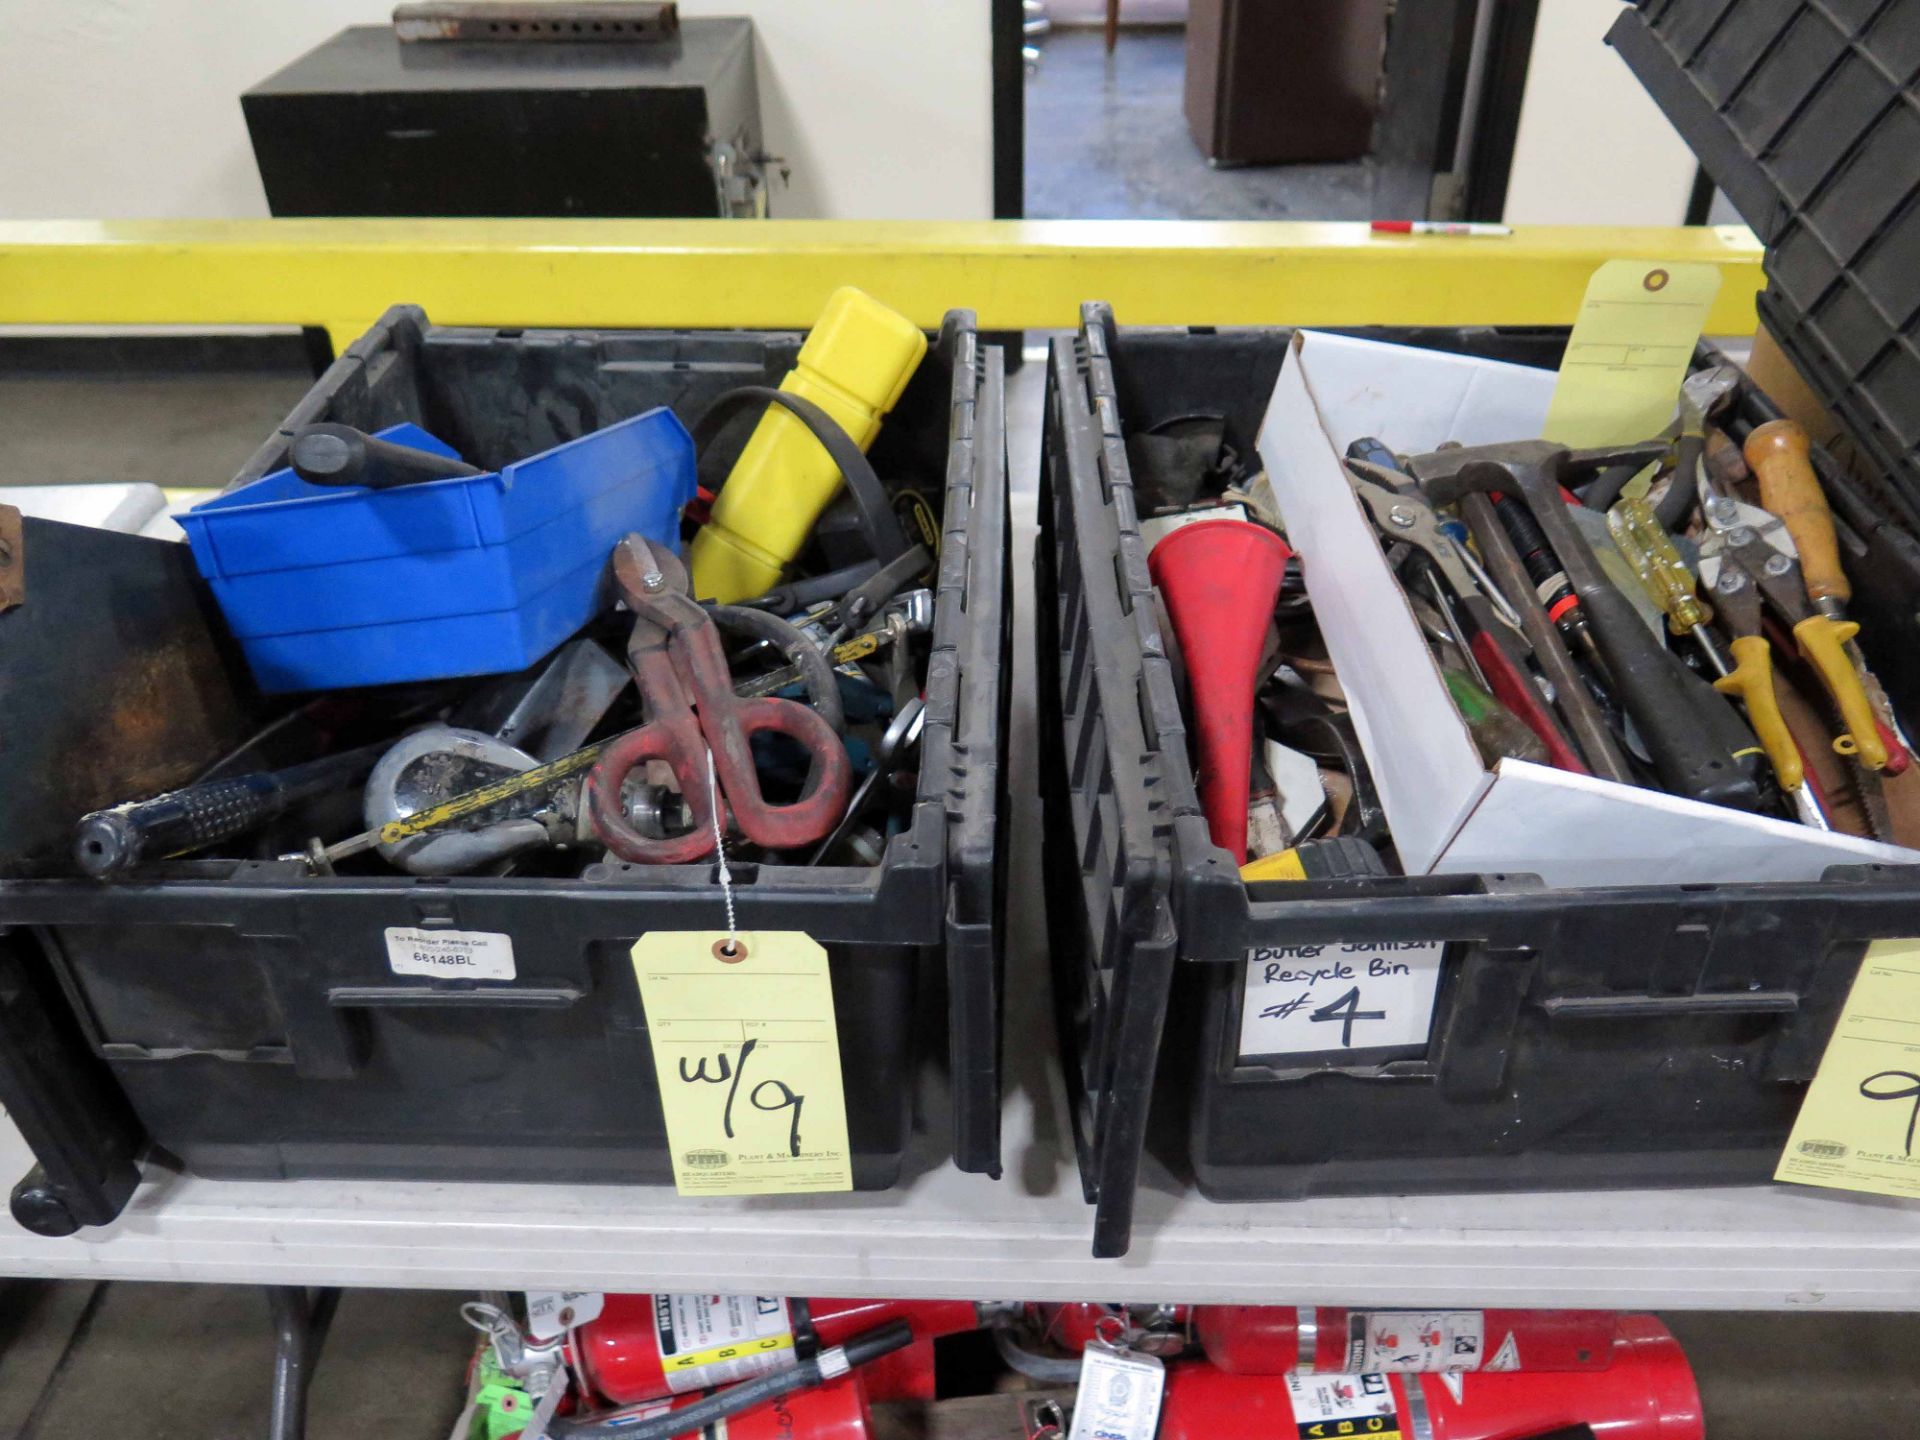 LOT OF HAMMERS, SCREWDRIVERS, HAND SAWS, WIRE CUTTERS, ETC.  (in two tubs)